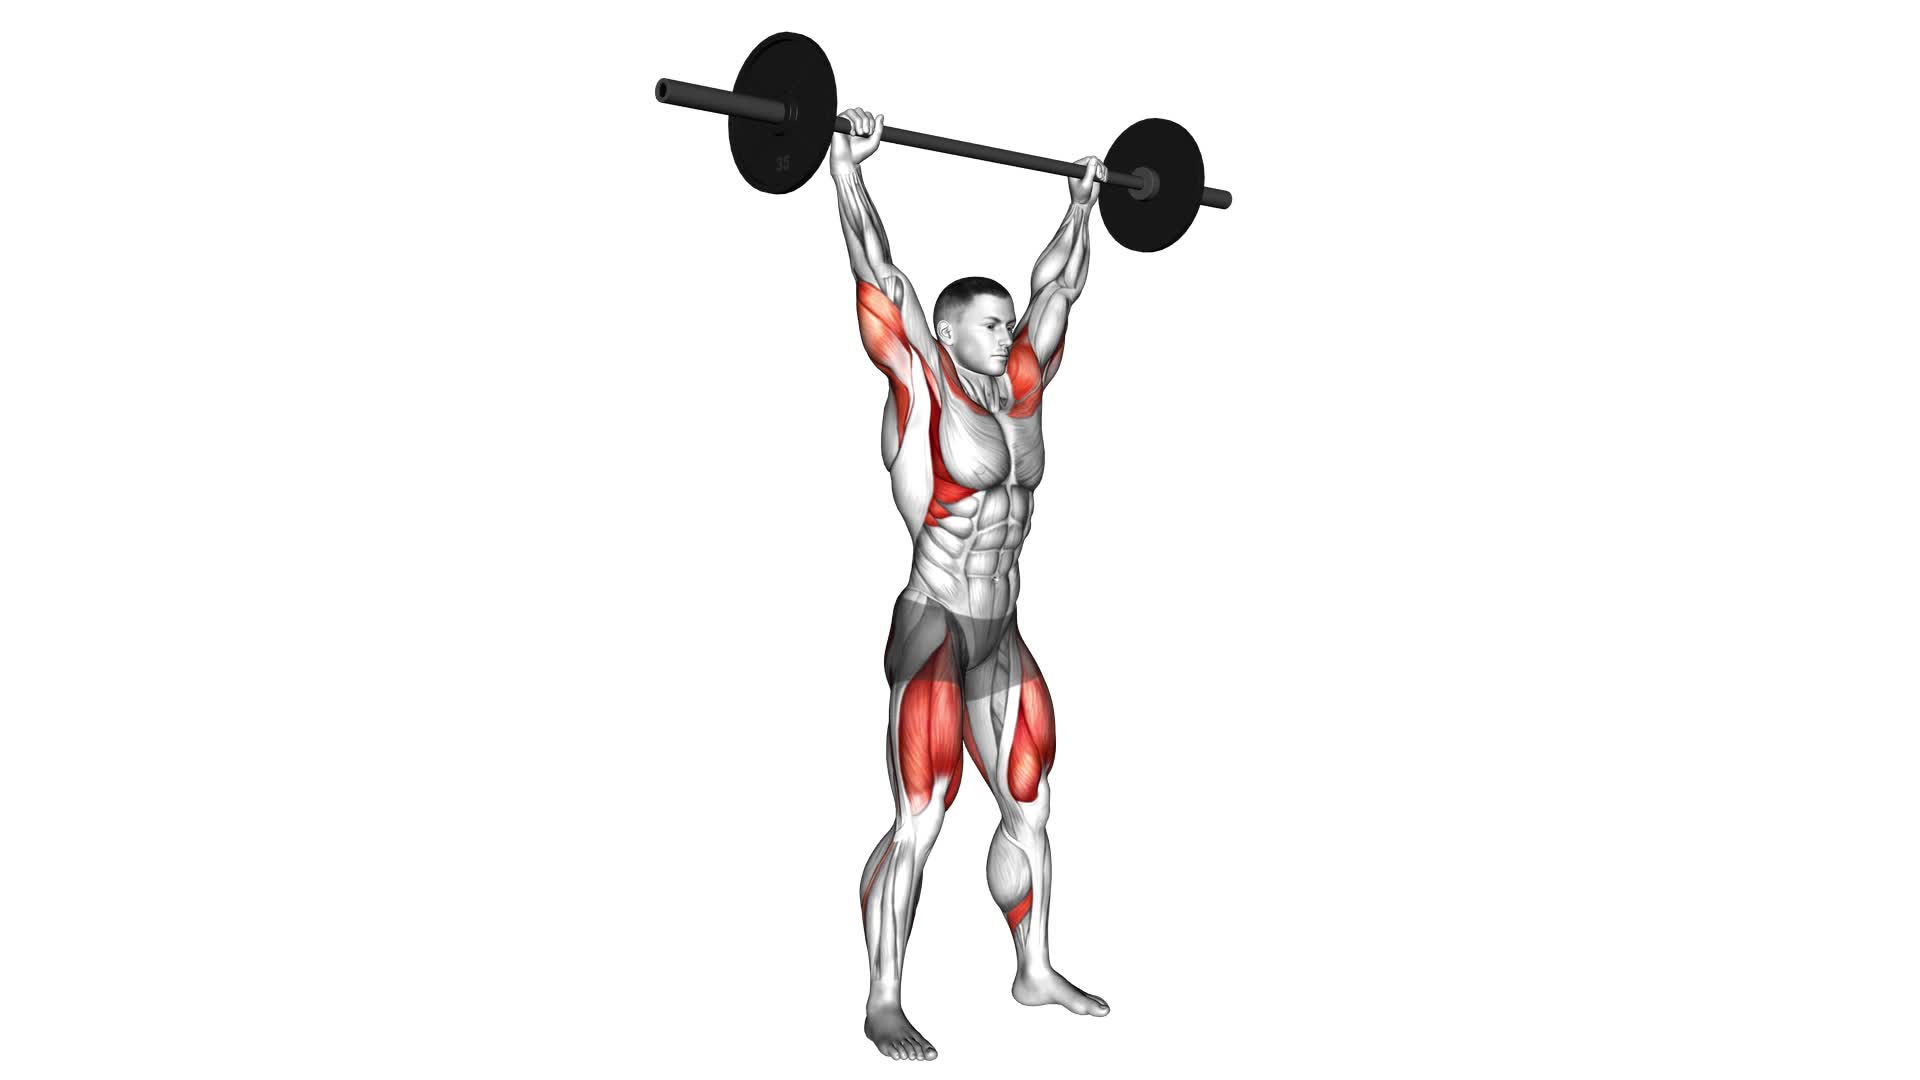 Barbell Power Snatch - Video Exercise Guide & Tips